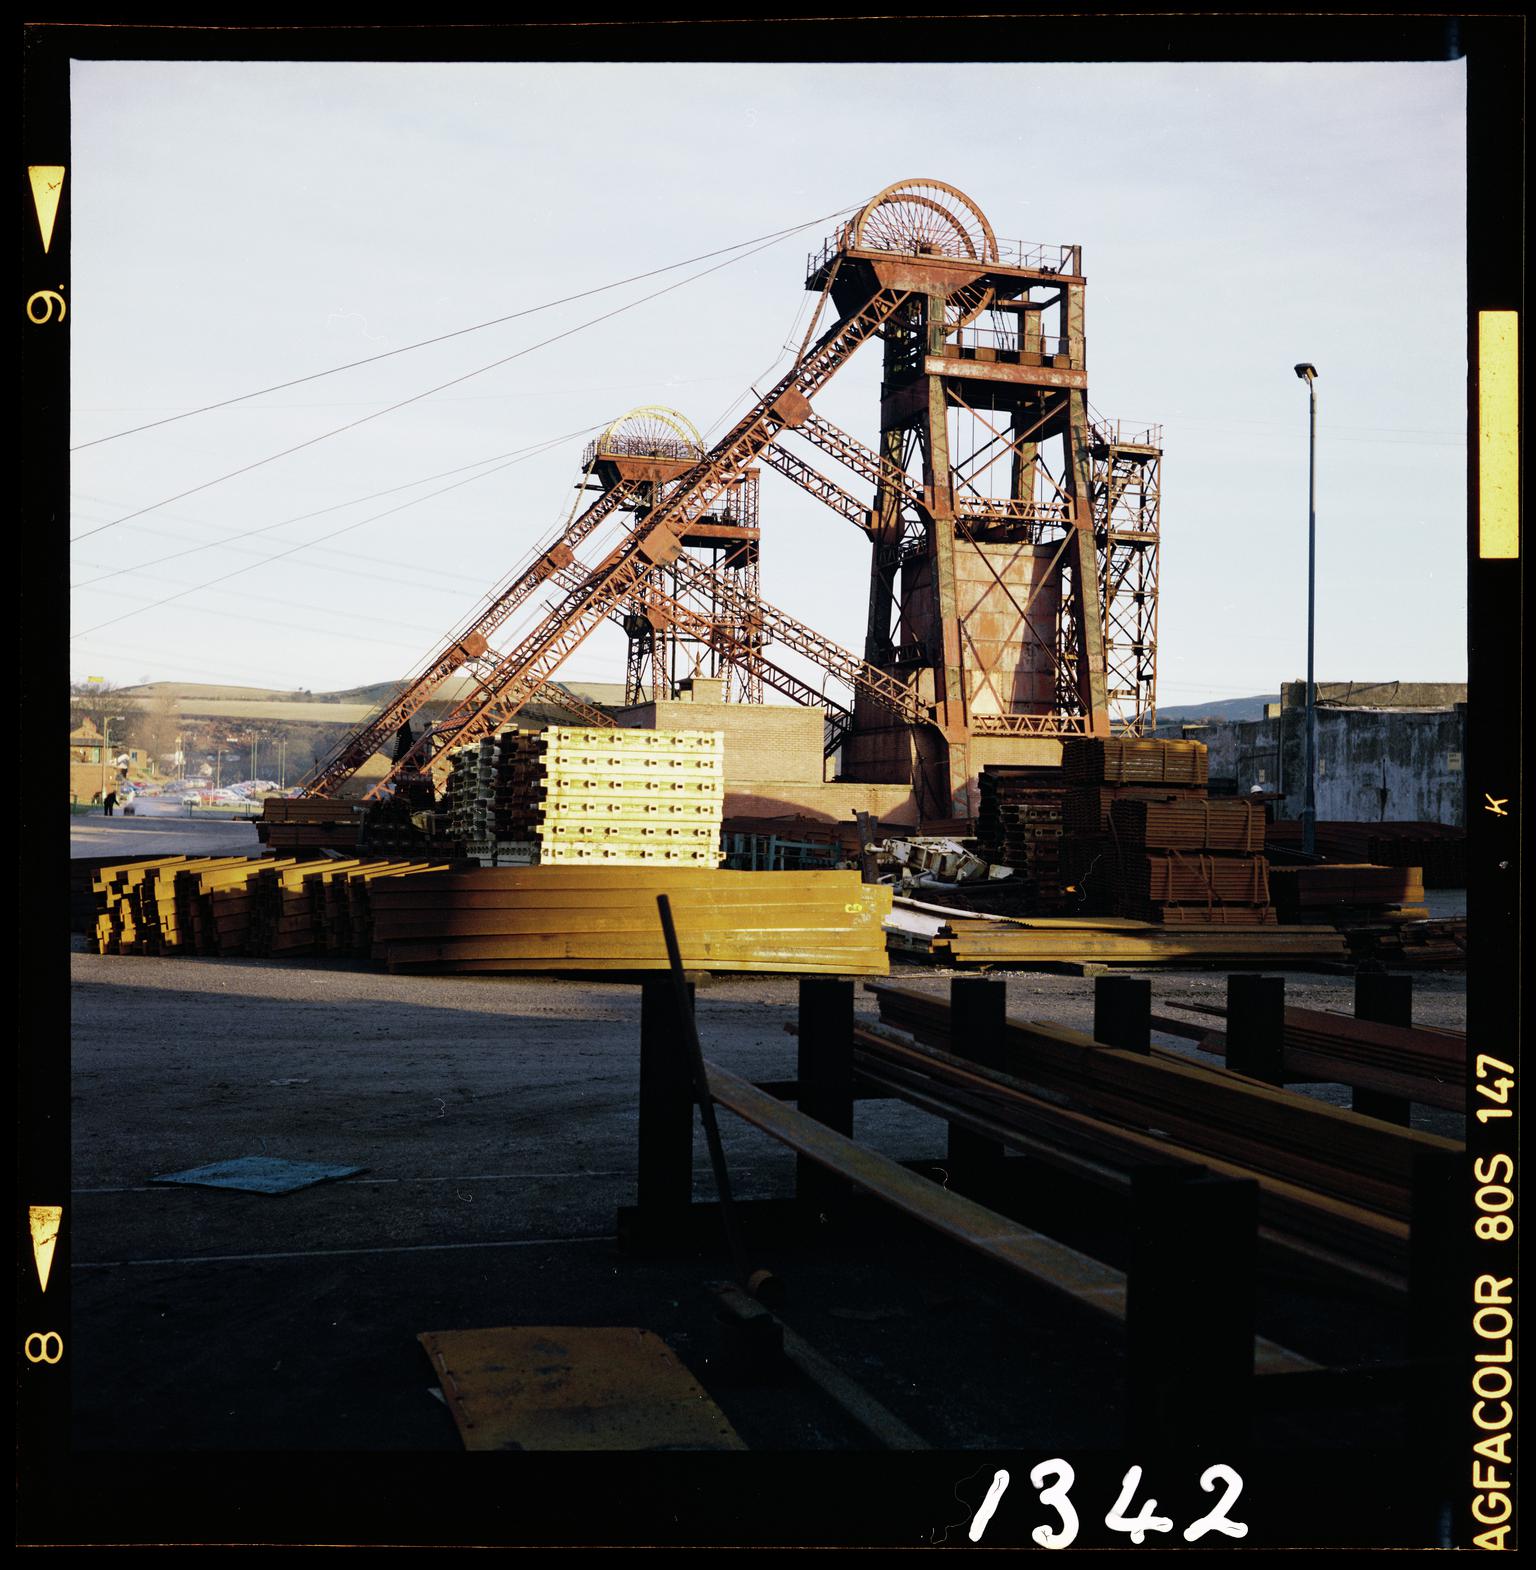 Coedely Colliery, film negative